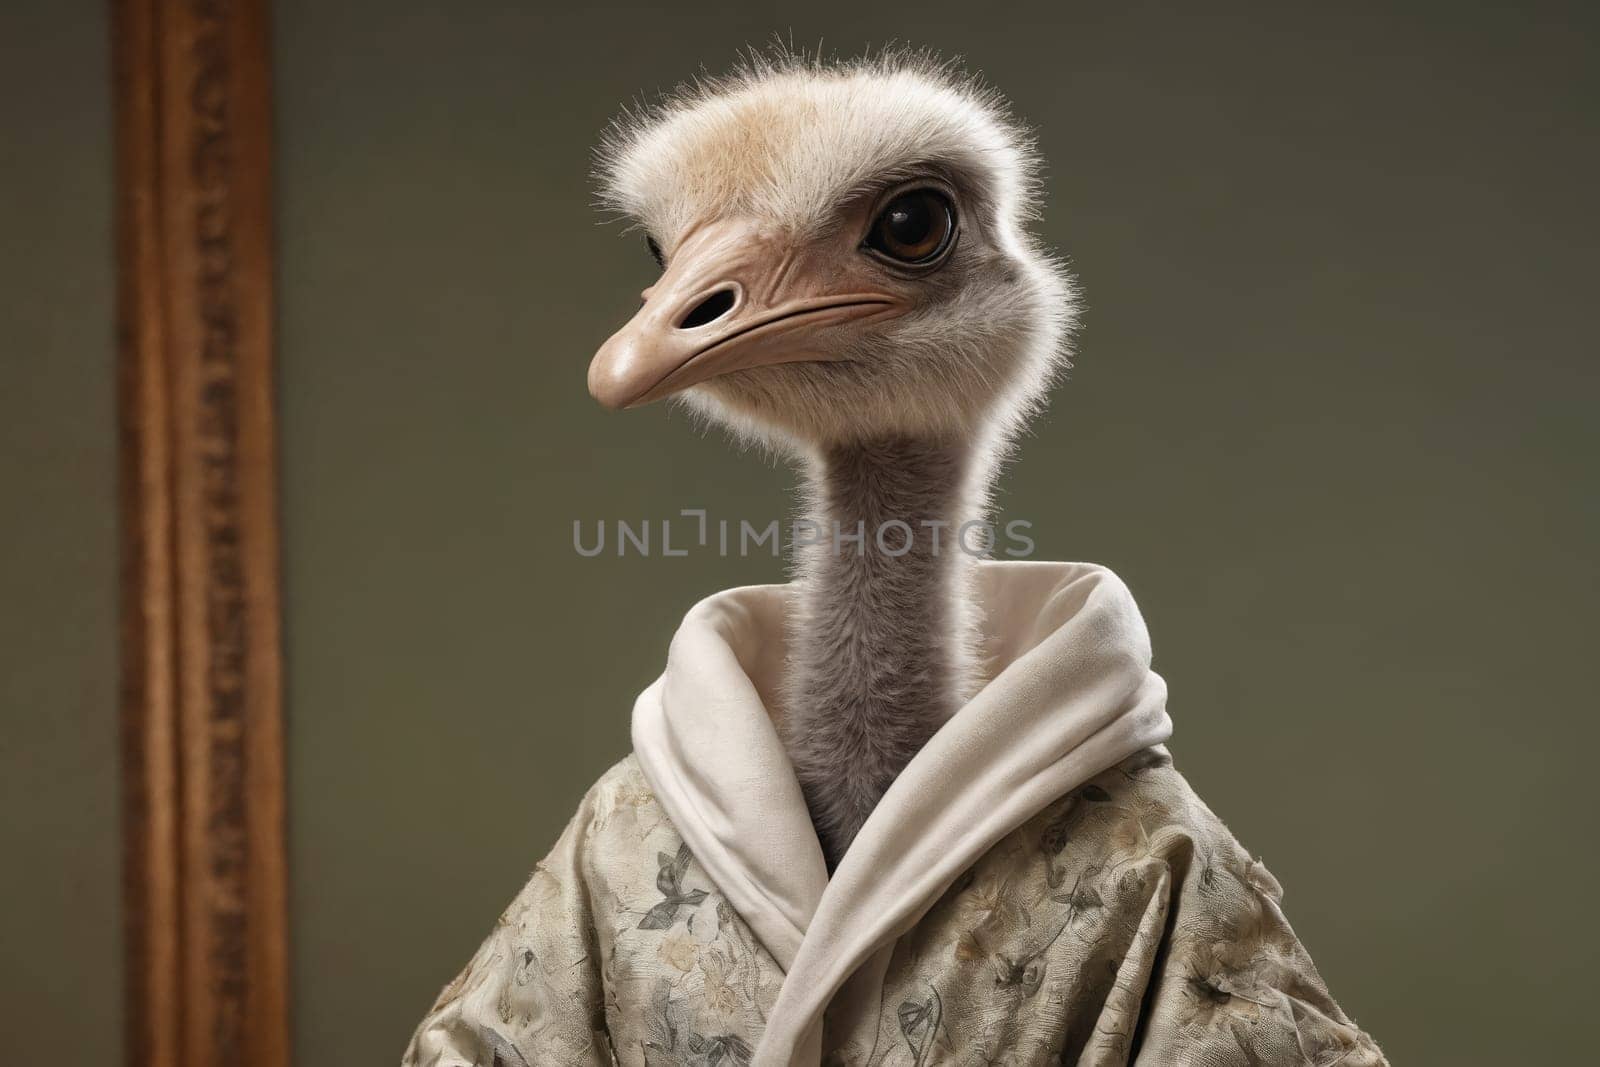 The unexpected elegance of an ostrich, captured in a striking pose wearing a dress.